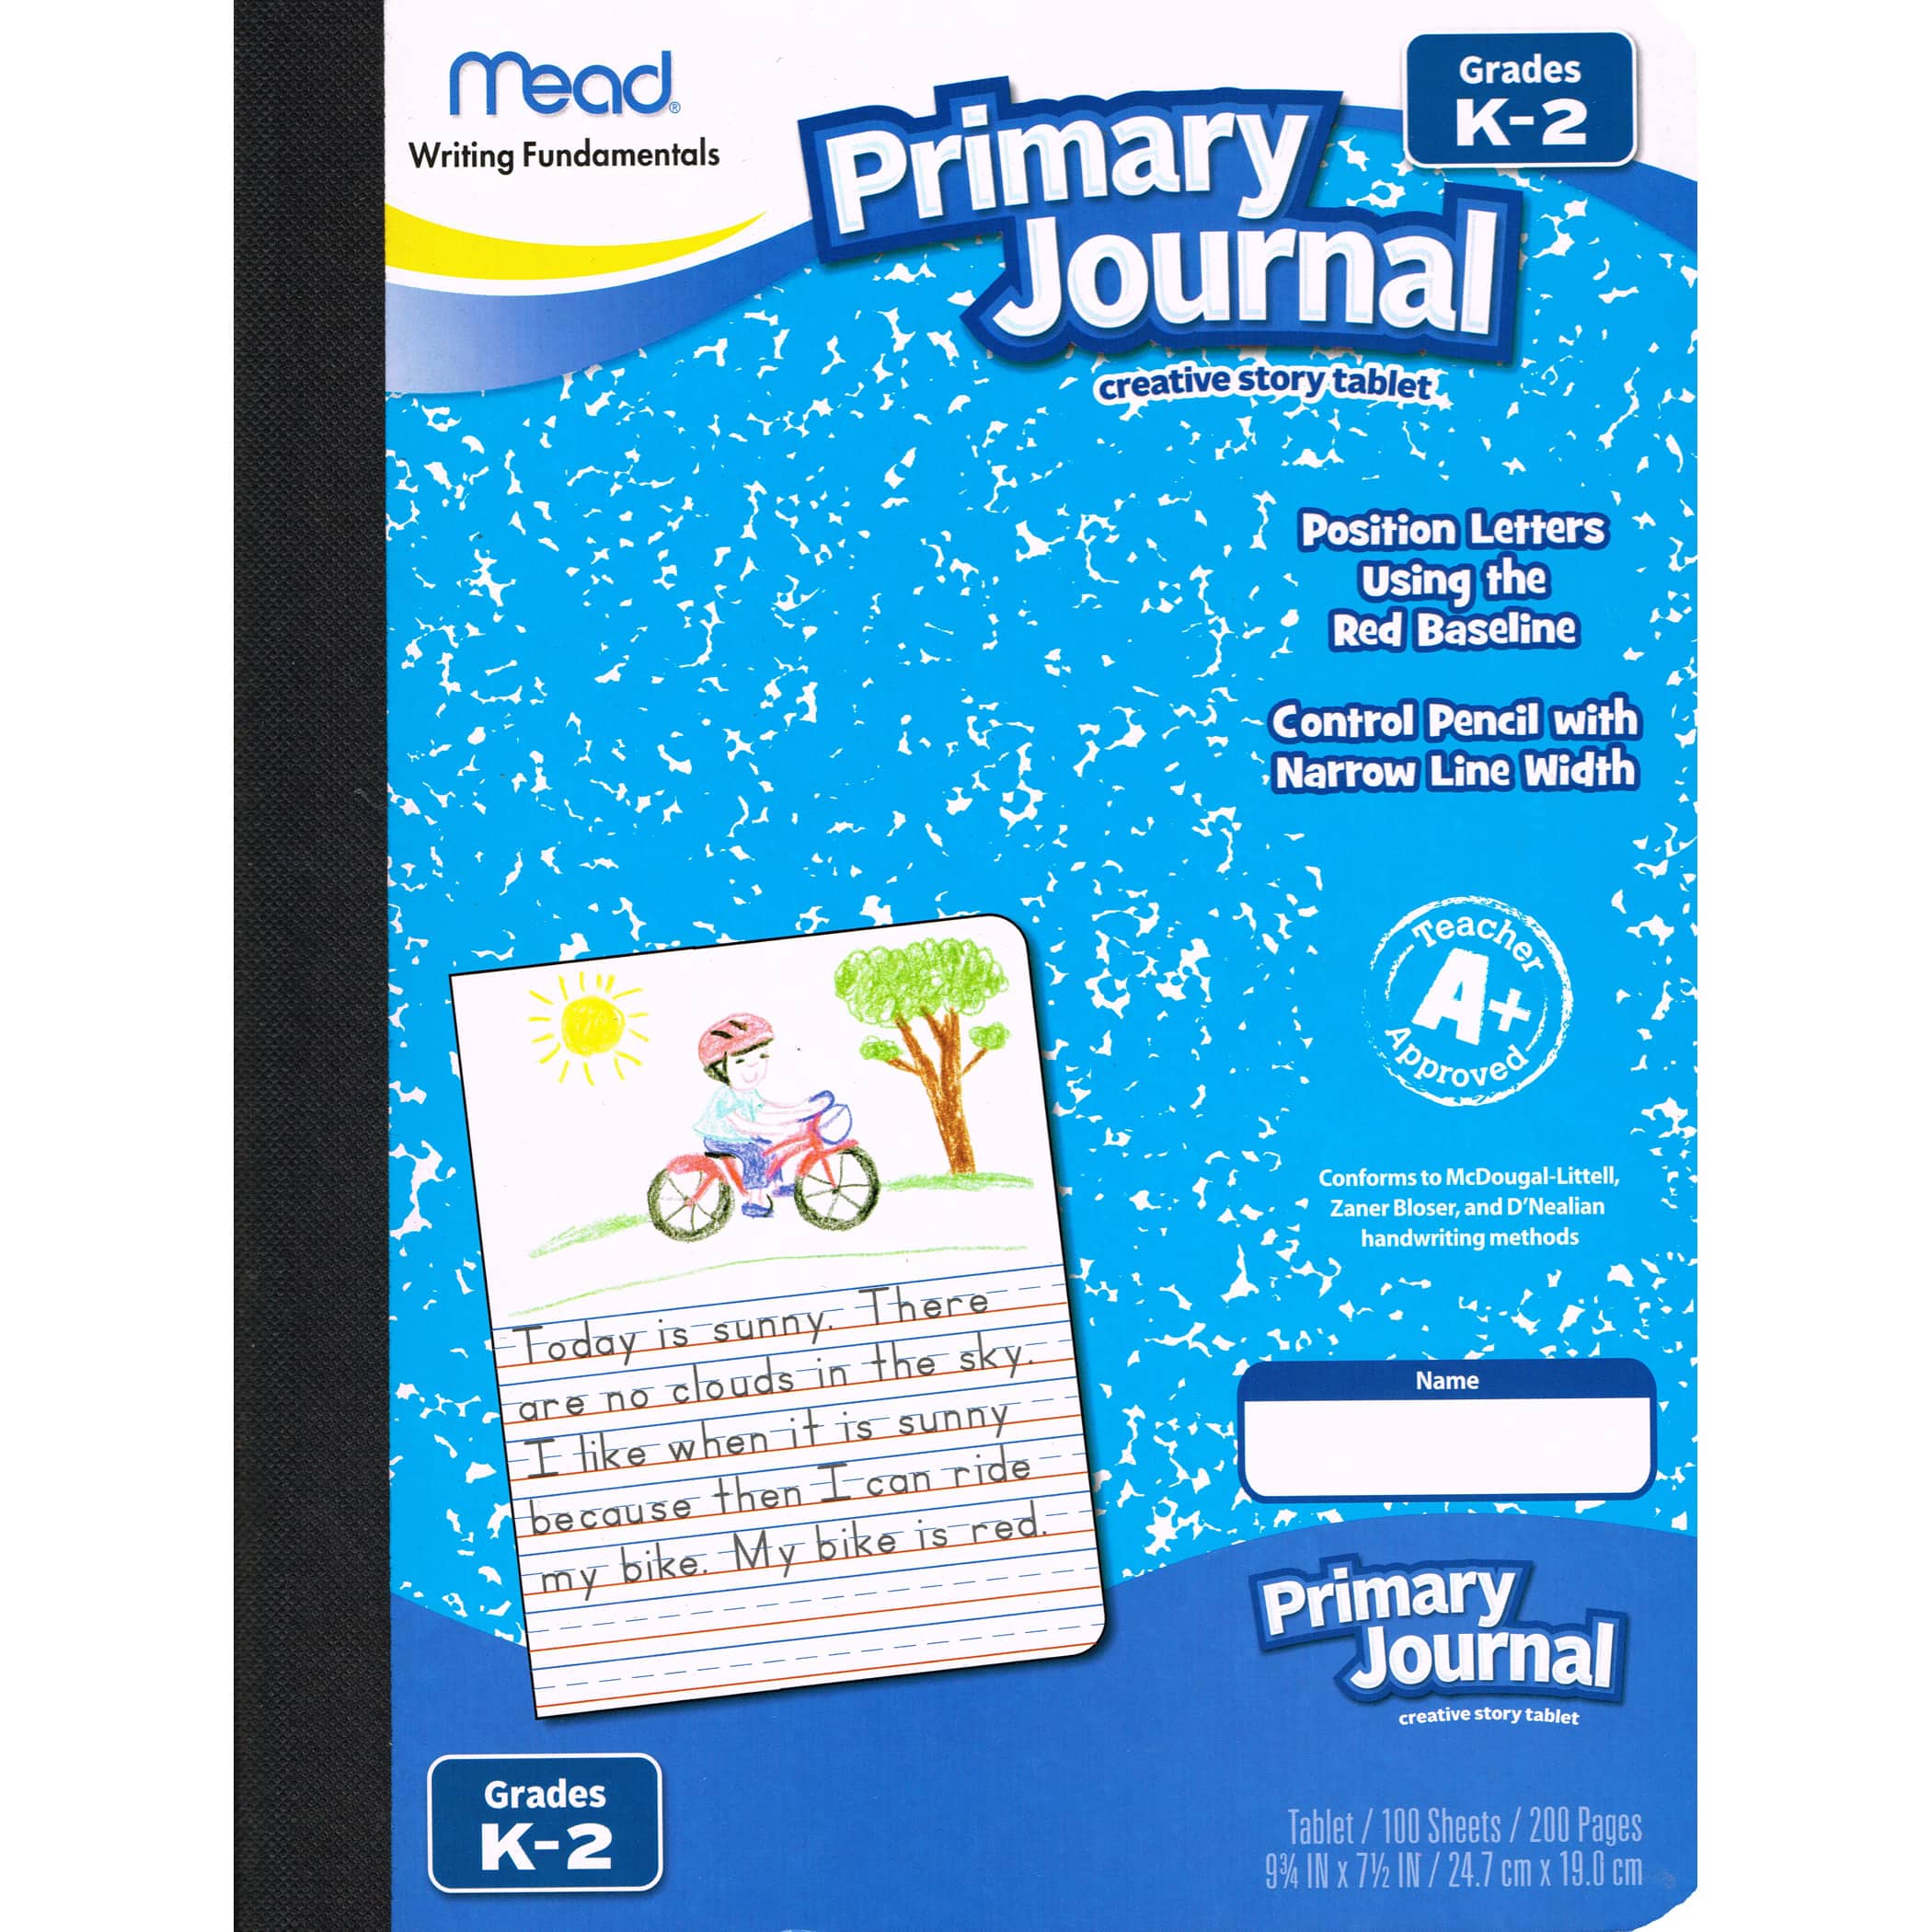 Multi BC-15773 Mead CASE of 6 Primary Journal Creative Story Tablet 09554 Grades K-2 6 Pack